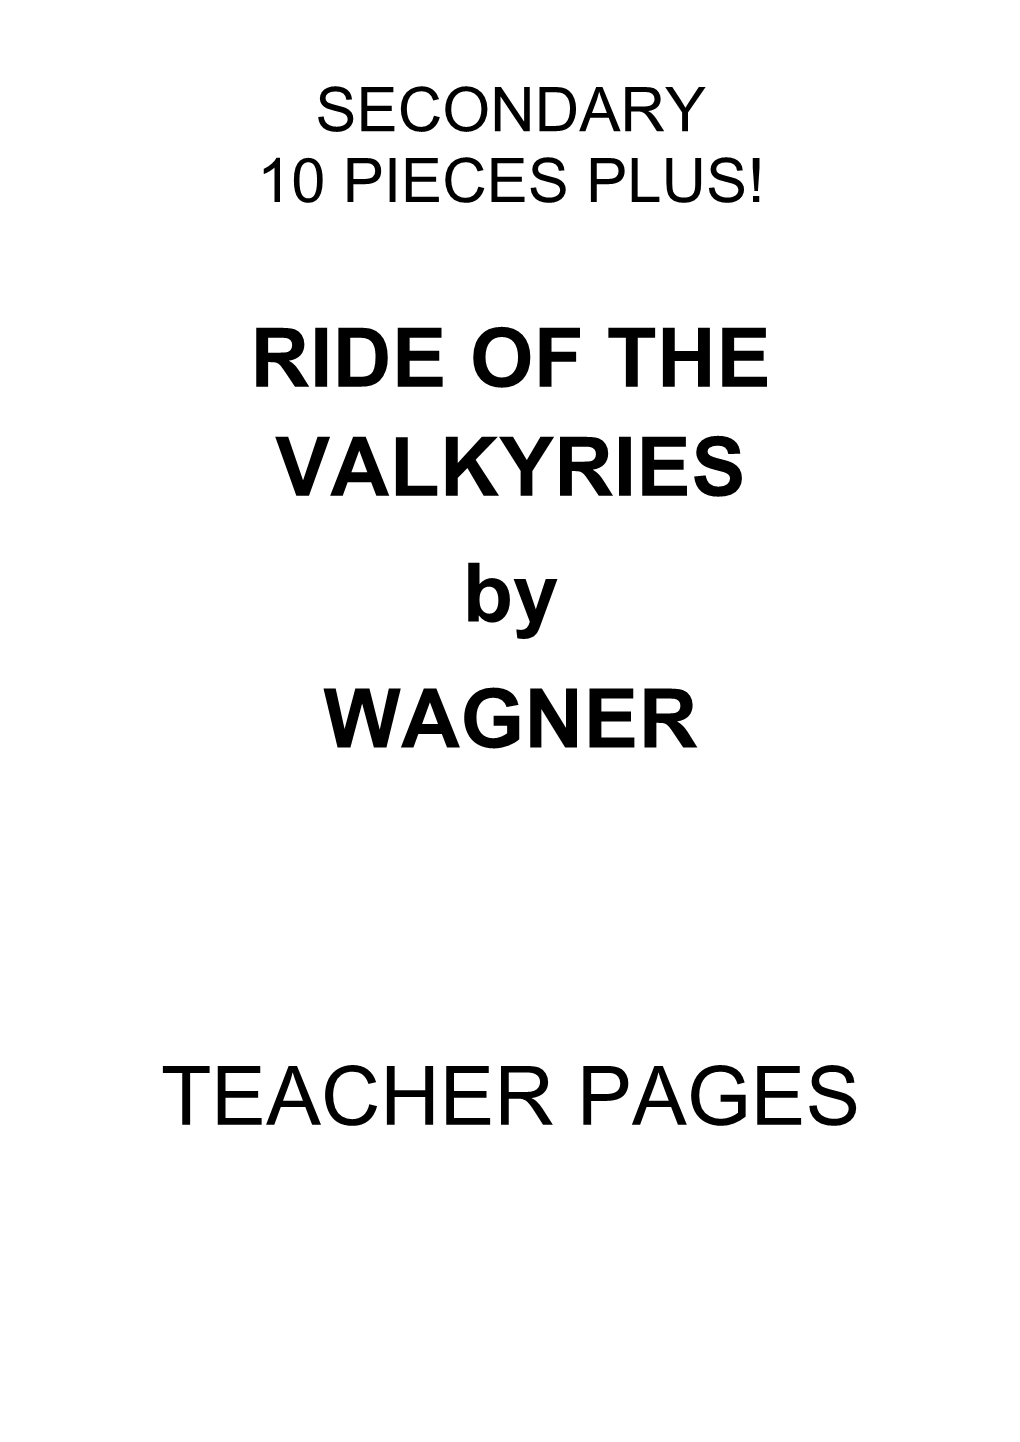 RIDE of the VALKYRIES by WAGNER TEACHER PAGES